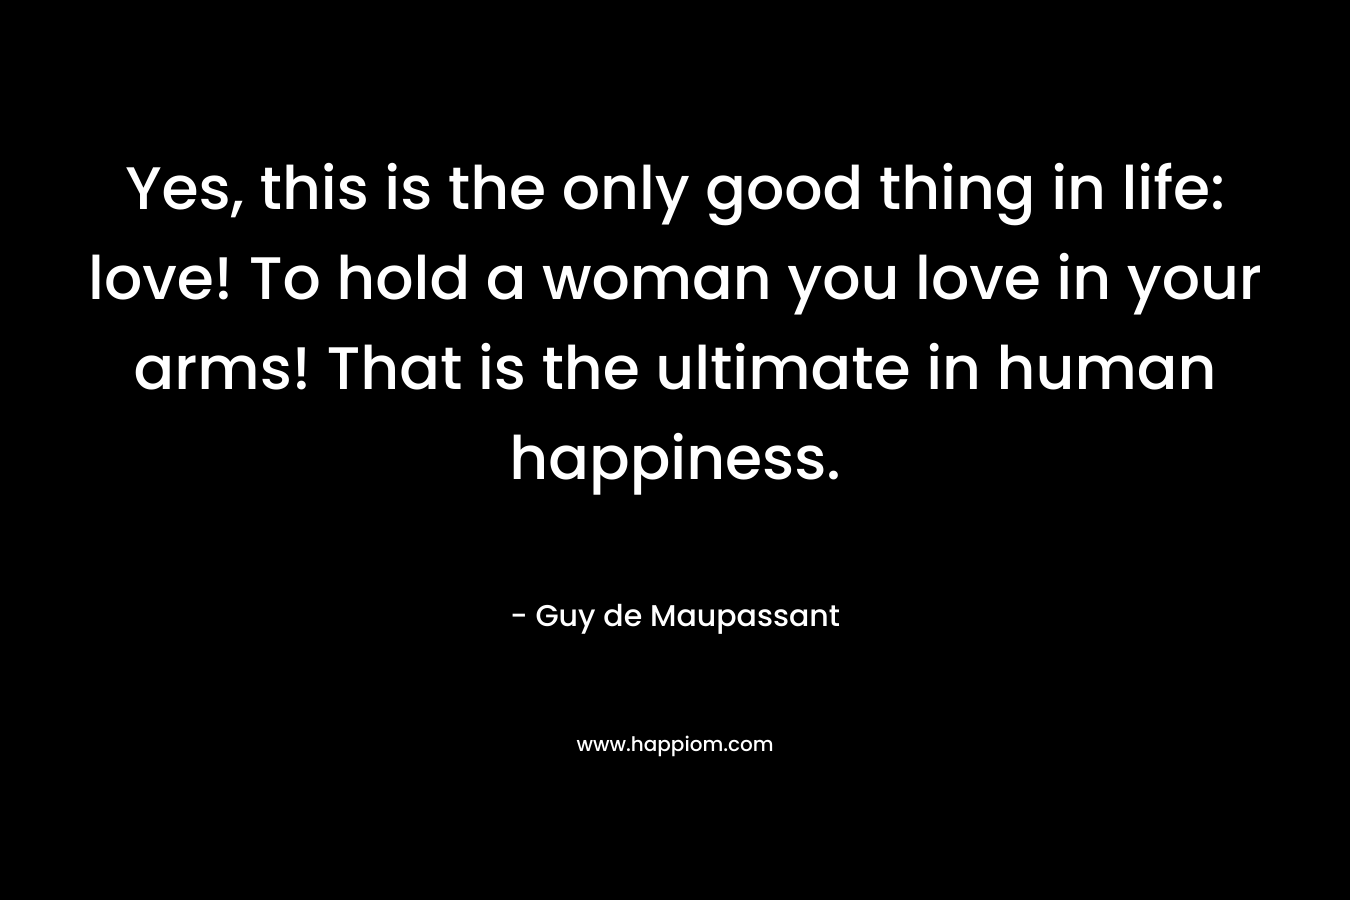 Yes, this is the only good thing in life: love! To hold a woman you love in your arms! That is the ultimate in human happiness.